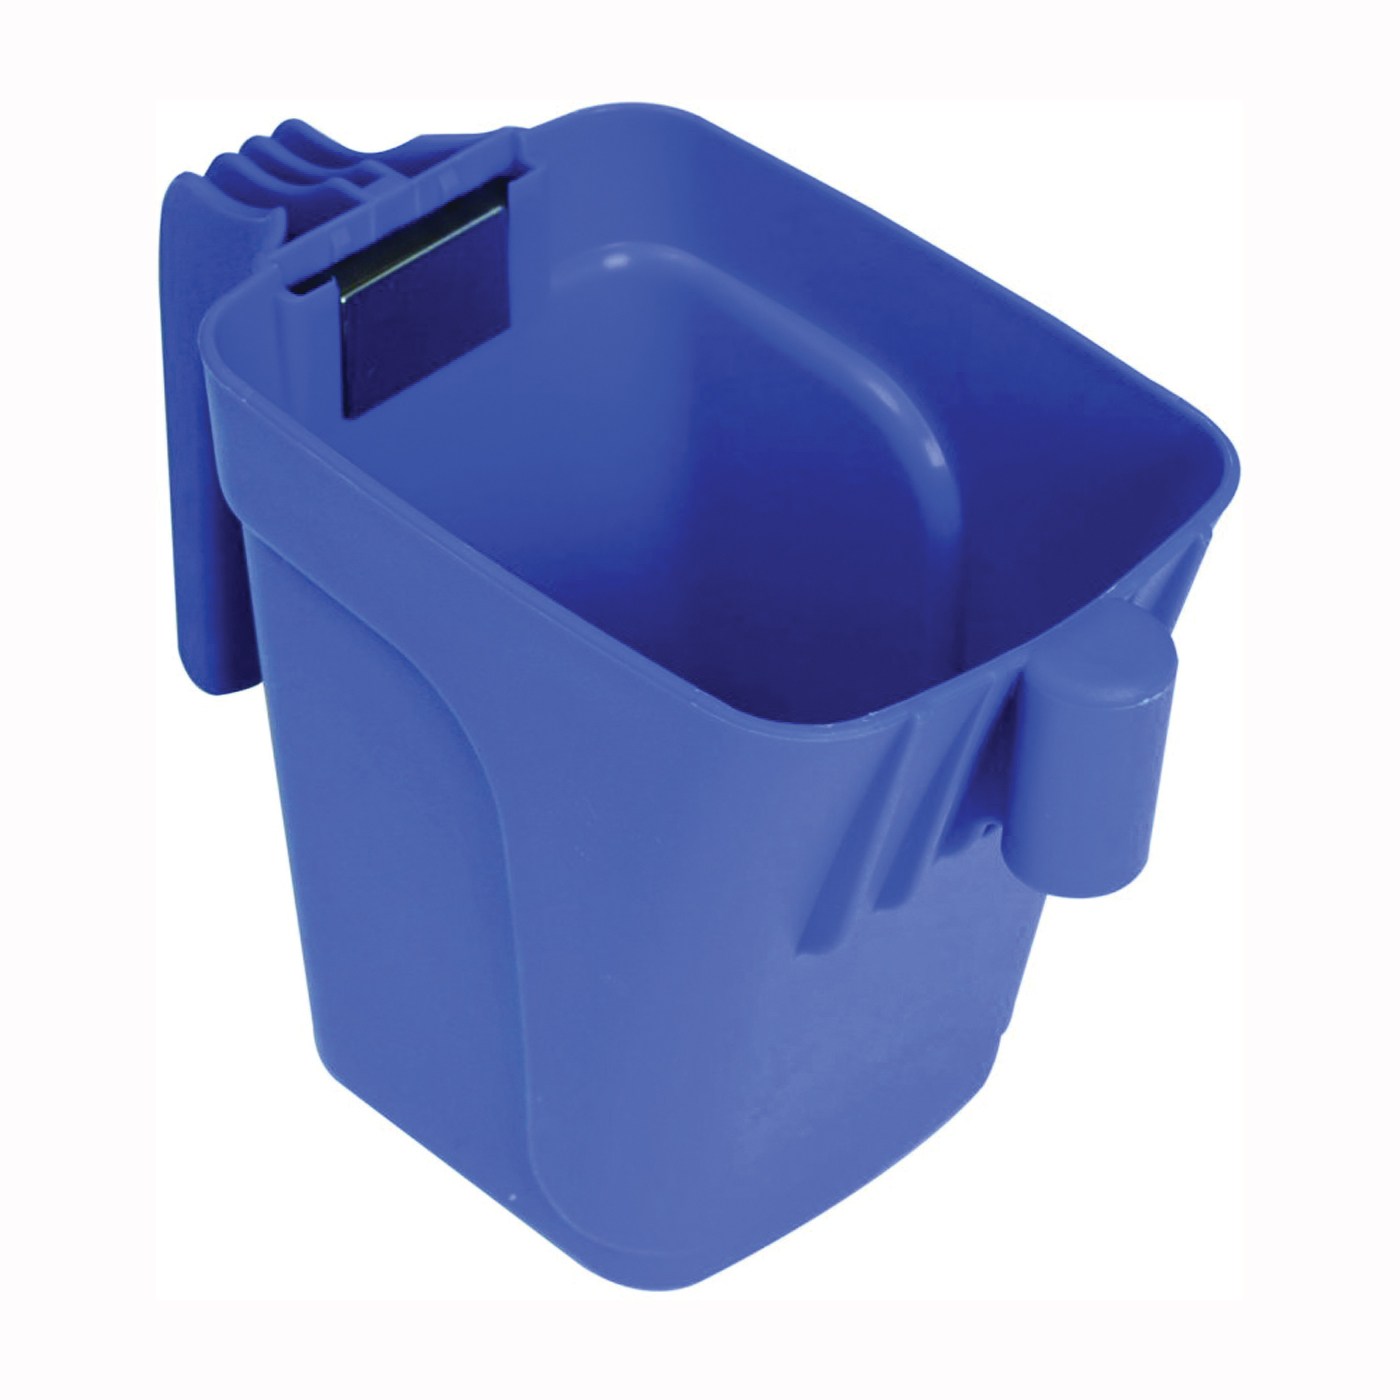 AC27-P Paint Cup, Lock-in, Stepladder, Plastic/Polymer, Blue